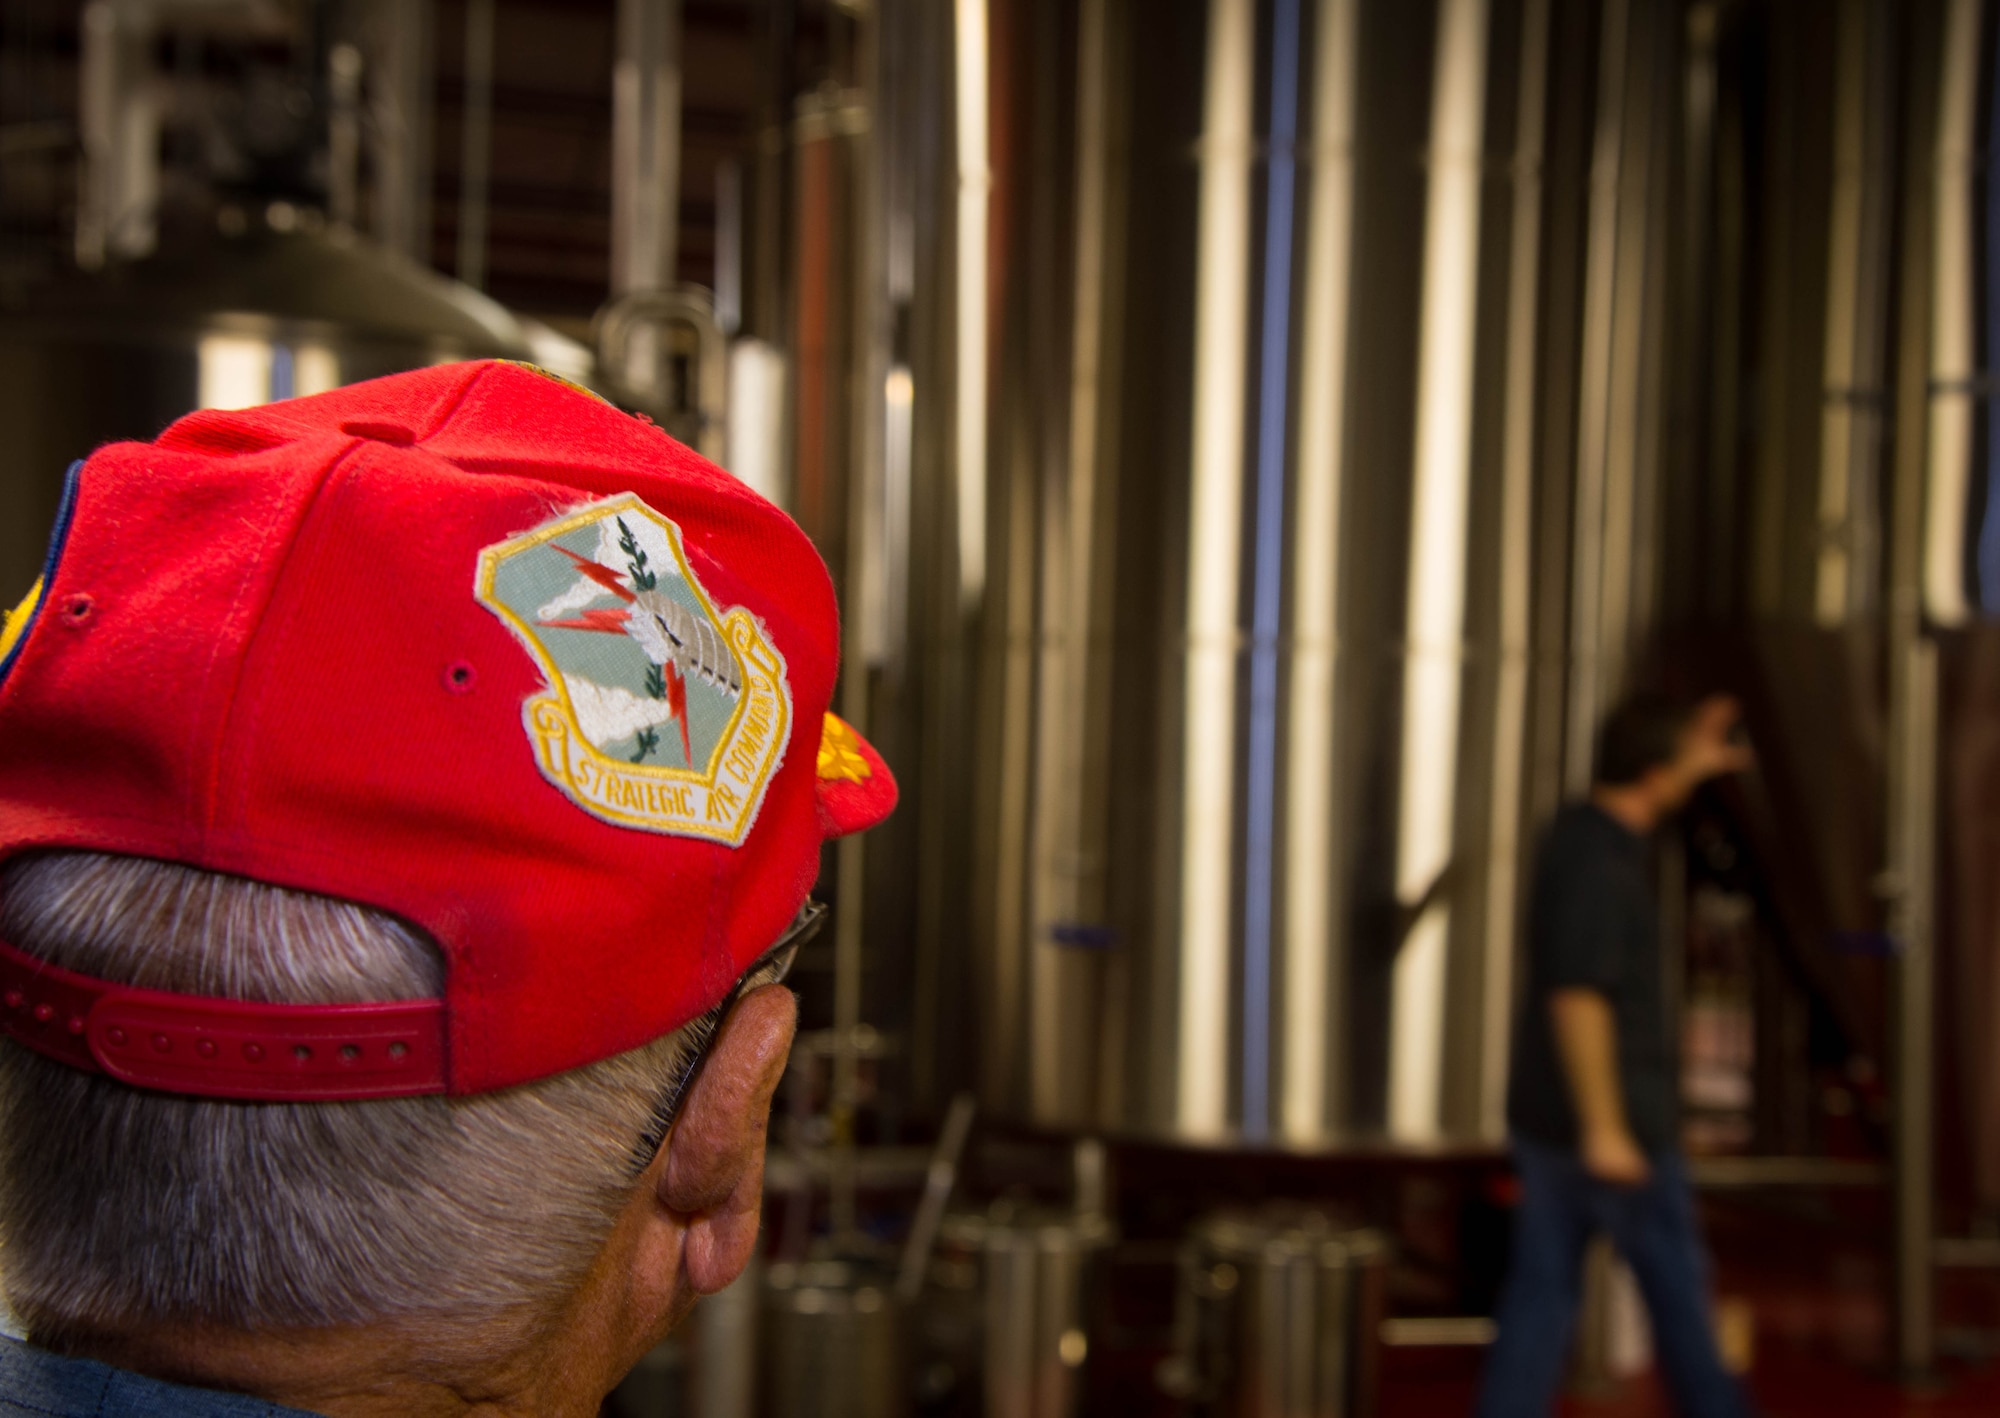 A 307th Bomb Wing veteran, looks at storage tanks used for brewing beer at the Red River Brewing Co. Shreveport, La., March 30, 2017. The 307th Bomb Wing was originally under Strategic Air Command in 1954 at Lincoln Air Force Base, Nebraska. While at Lincoln, the 307th functioned as a Combat Ready Unit, conducting combat training missions and maintaining an alert force commitment, both at Lincoln and overseas bases, until its deactivation on March 25, 1965. (U.S. Air Force photo by Staff Sgt. Jason McCasland/Released)